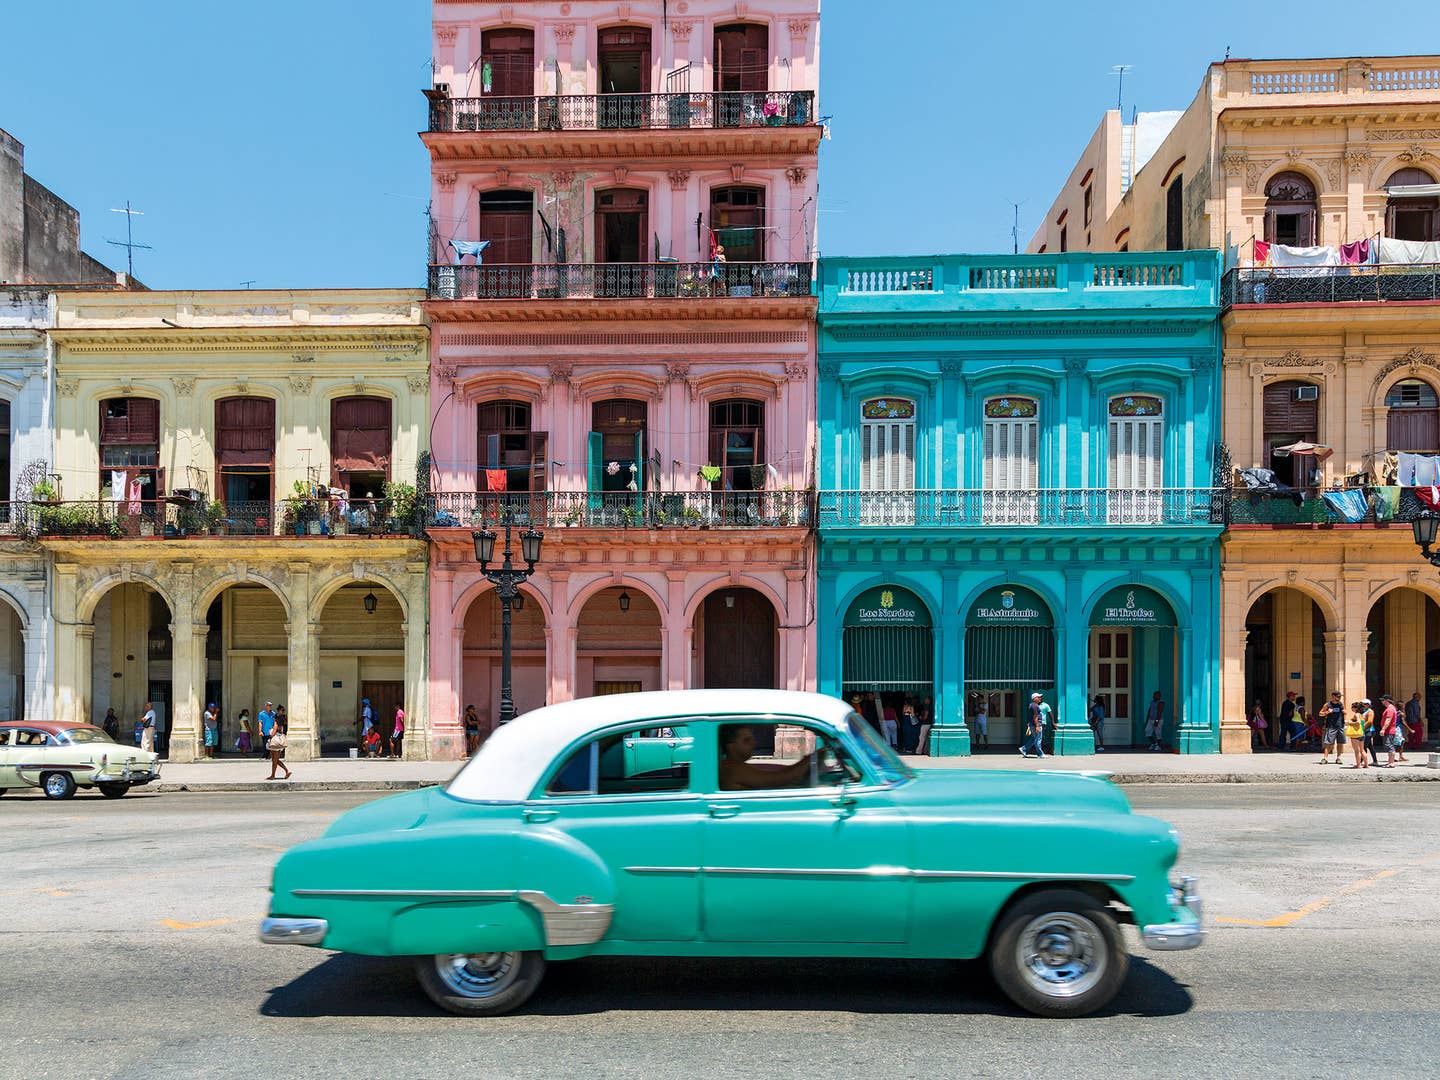 American Tourists Are Causing Food Shortages in Cuba